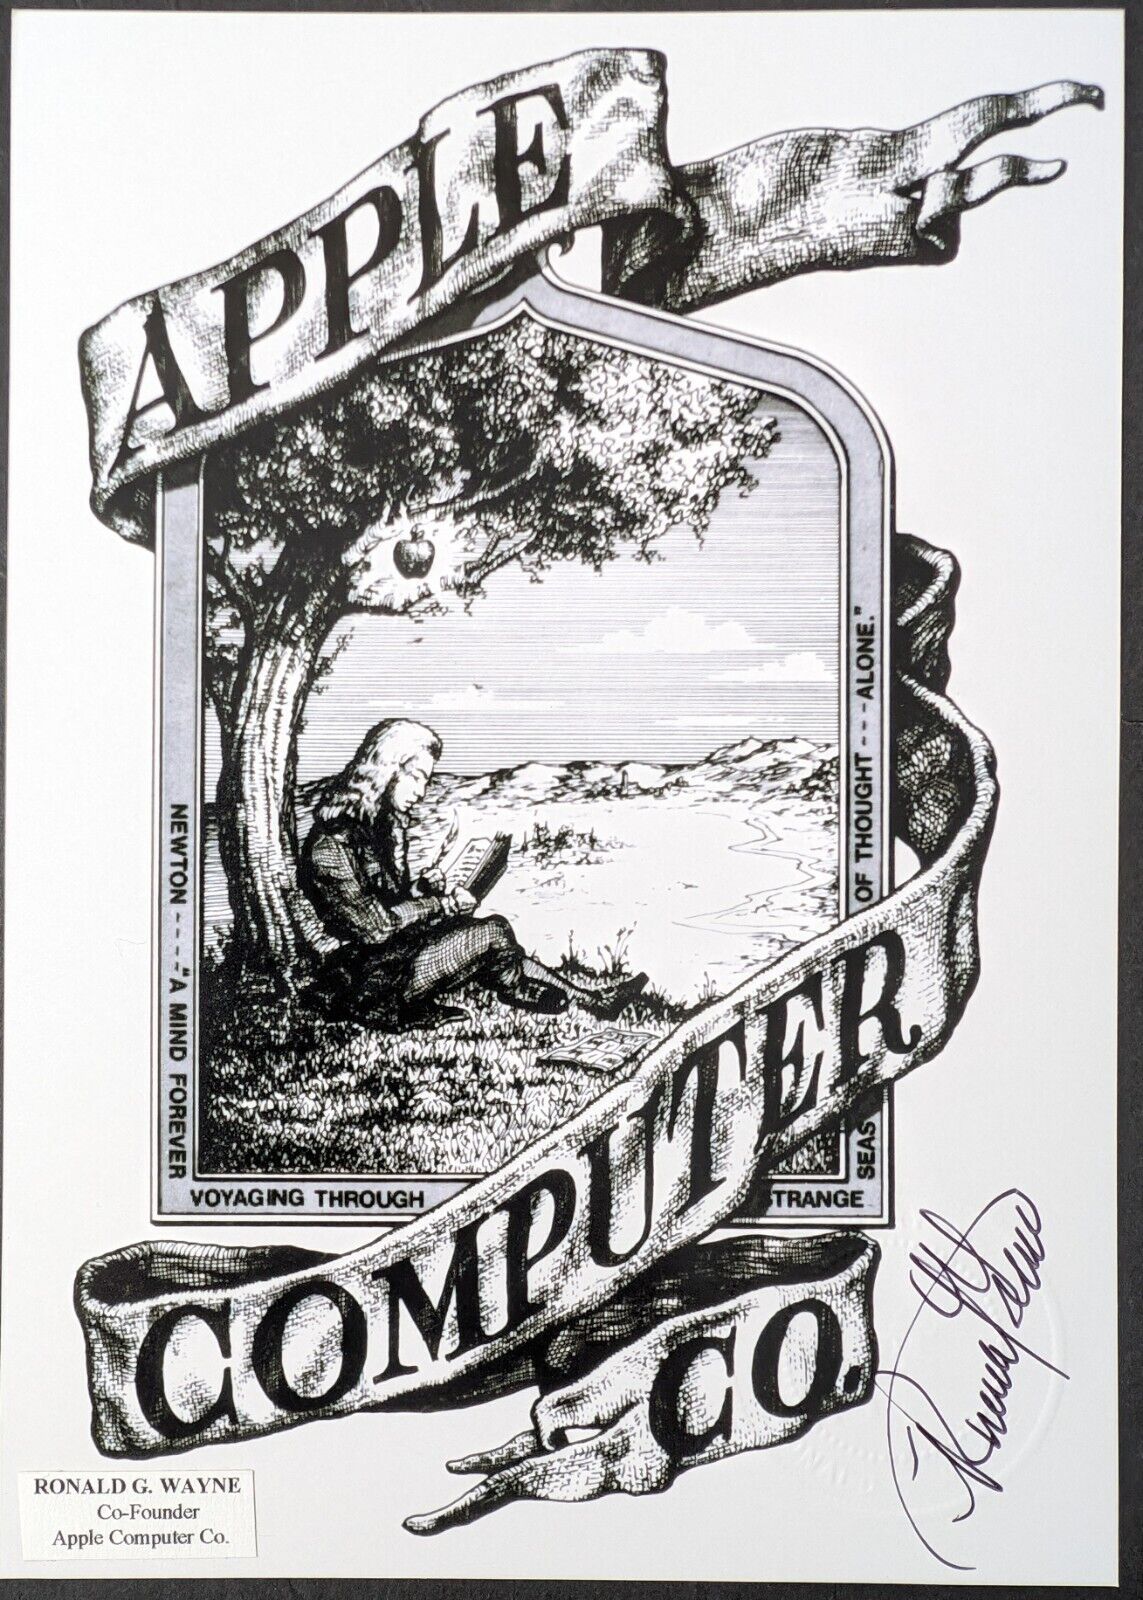 RONALD WAYNE (Apple Computer Co-Founder) Signed/Autographed 7x5 Photograph